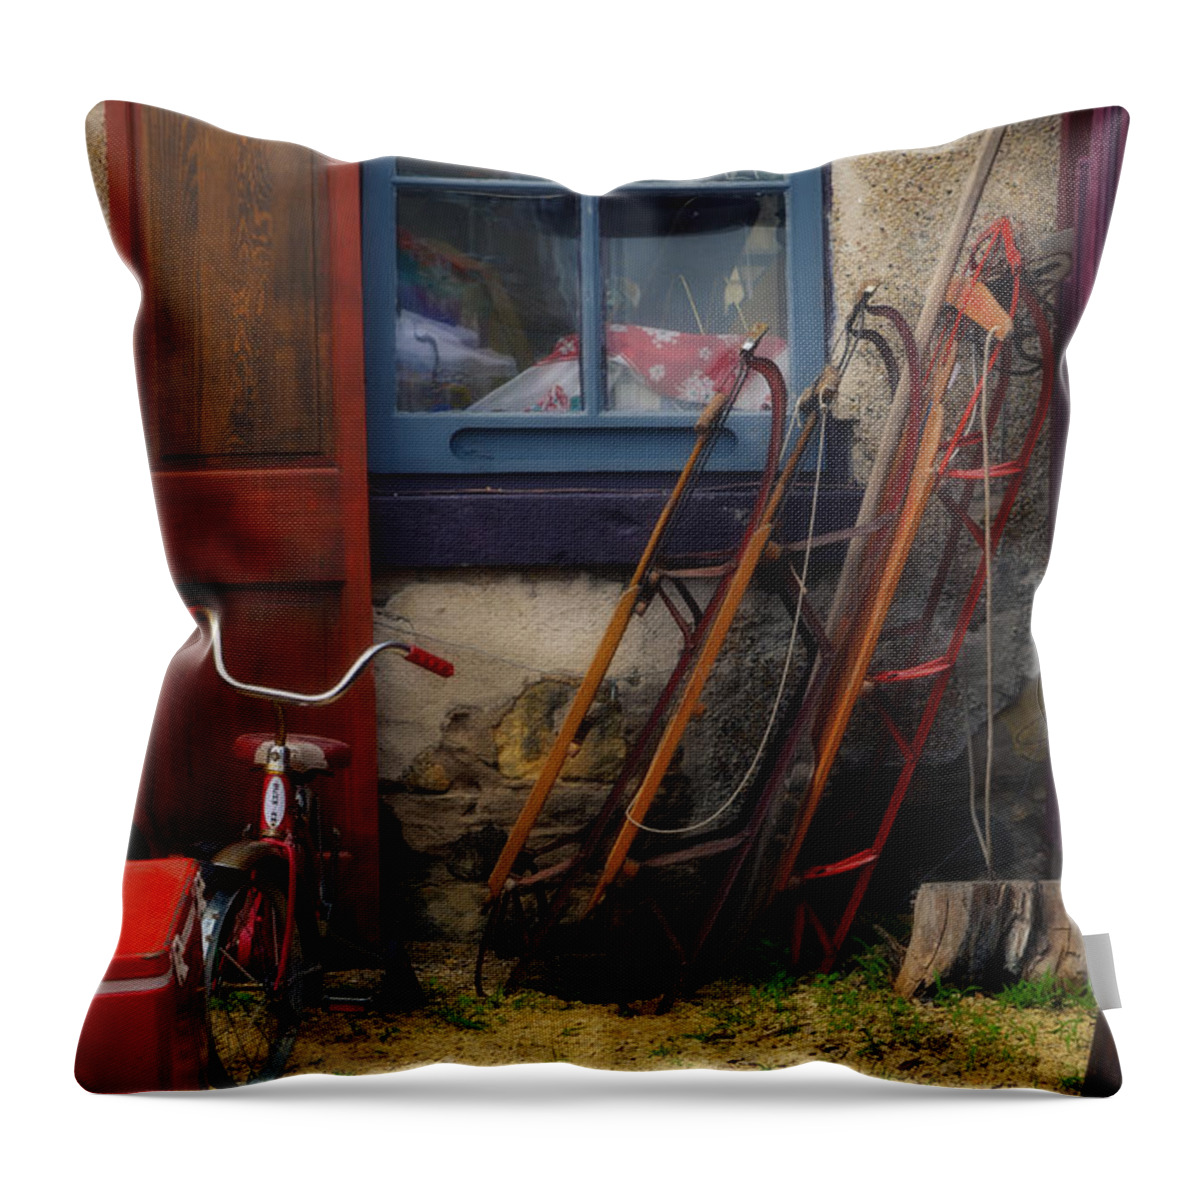 The Old Sleds Throw Pillow featuring the photograph The Old Sleds by Mary Machare